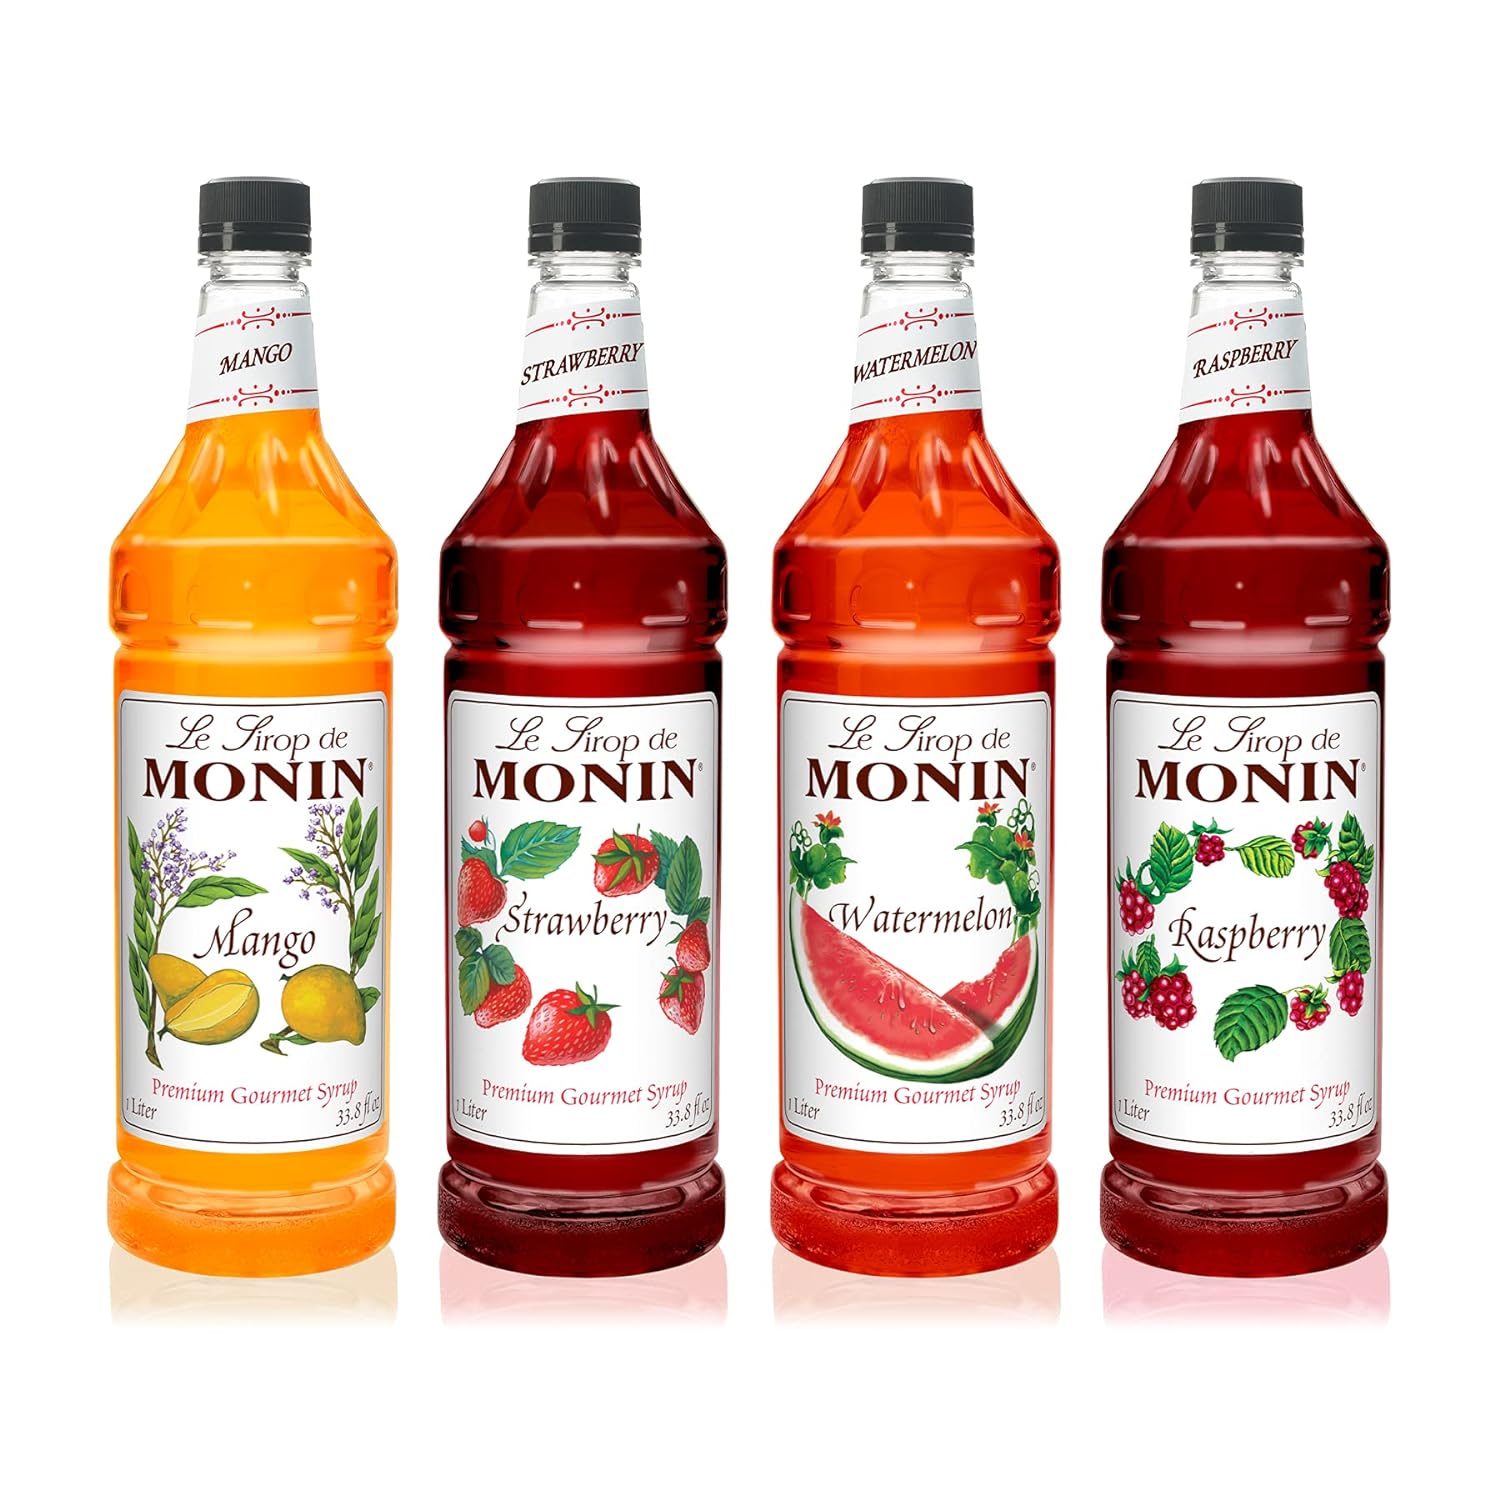 syrup Monin - Monin Syrup Summer Variety Pack, Fruit Flavored Syrup, Mango, Strawberry, Raspberry, & Watermelon Syrup, Simple Syrup for Margaritas, Lemonade, Cocktails, & More, Clean Label (1 Liter, 4-Pack)